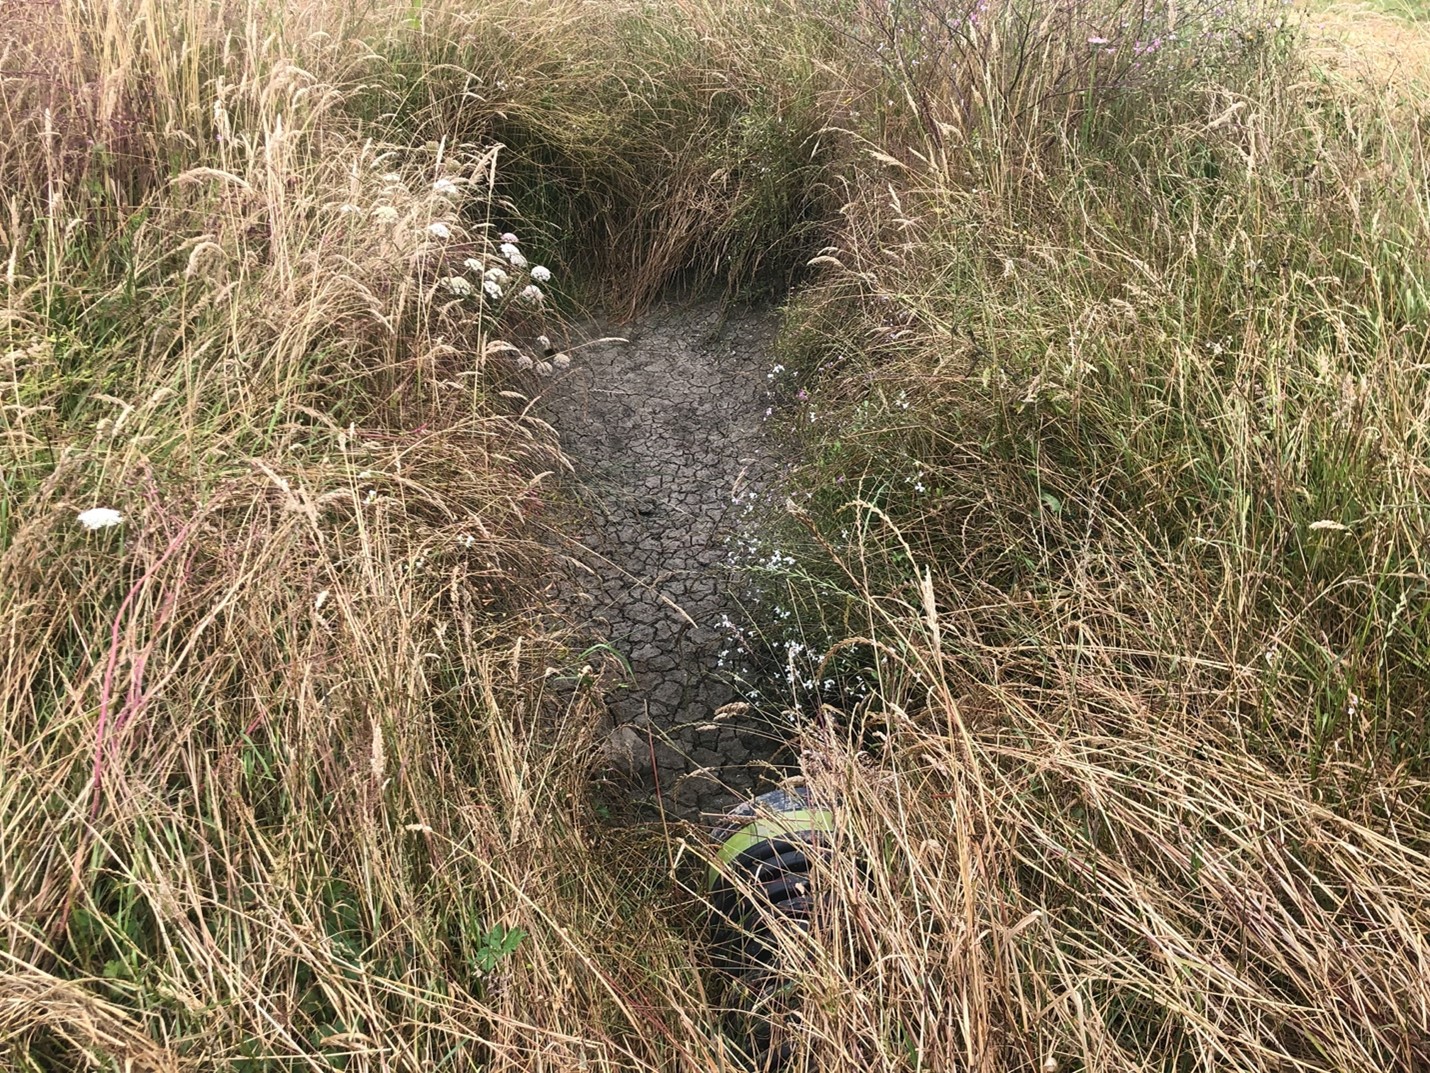 A small basin surrounded by grass with dried cracked sediment at the bottom. A culvert is in the foreground to drain water out of the basin and leave the sediment behind.